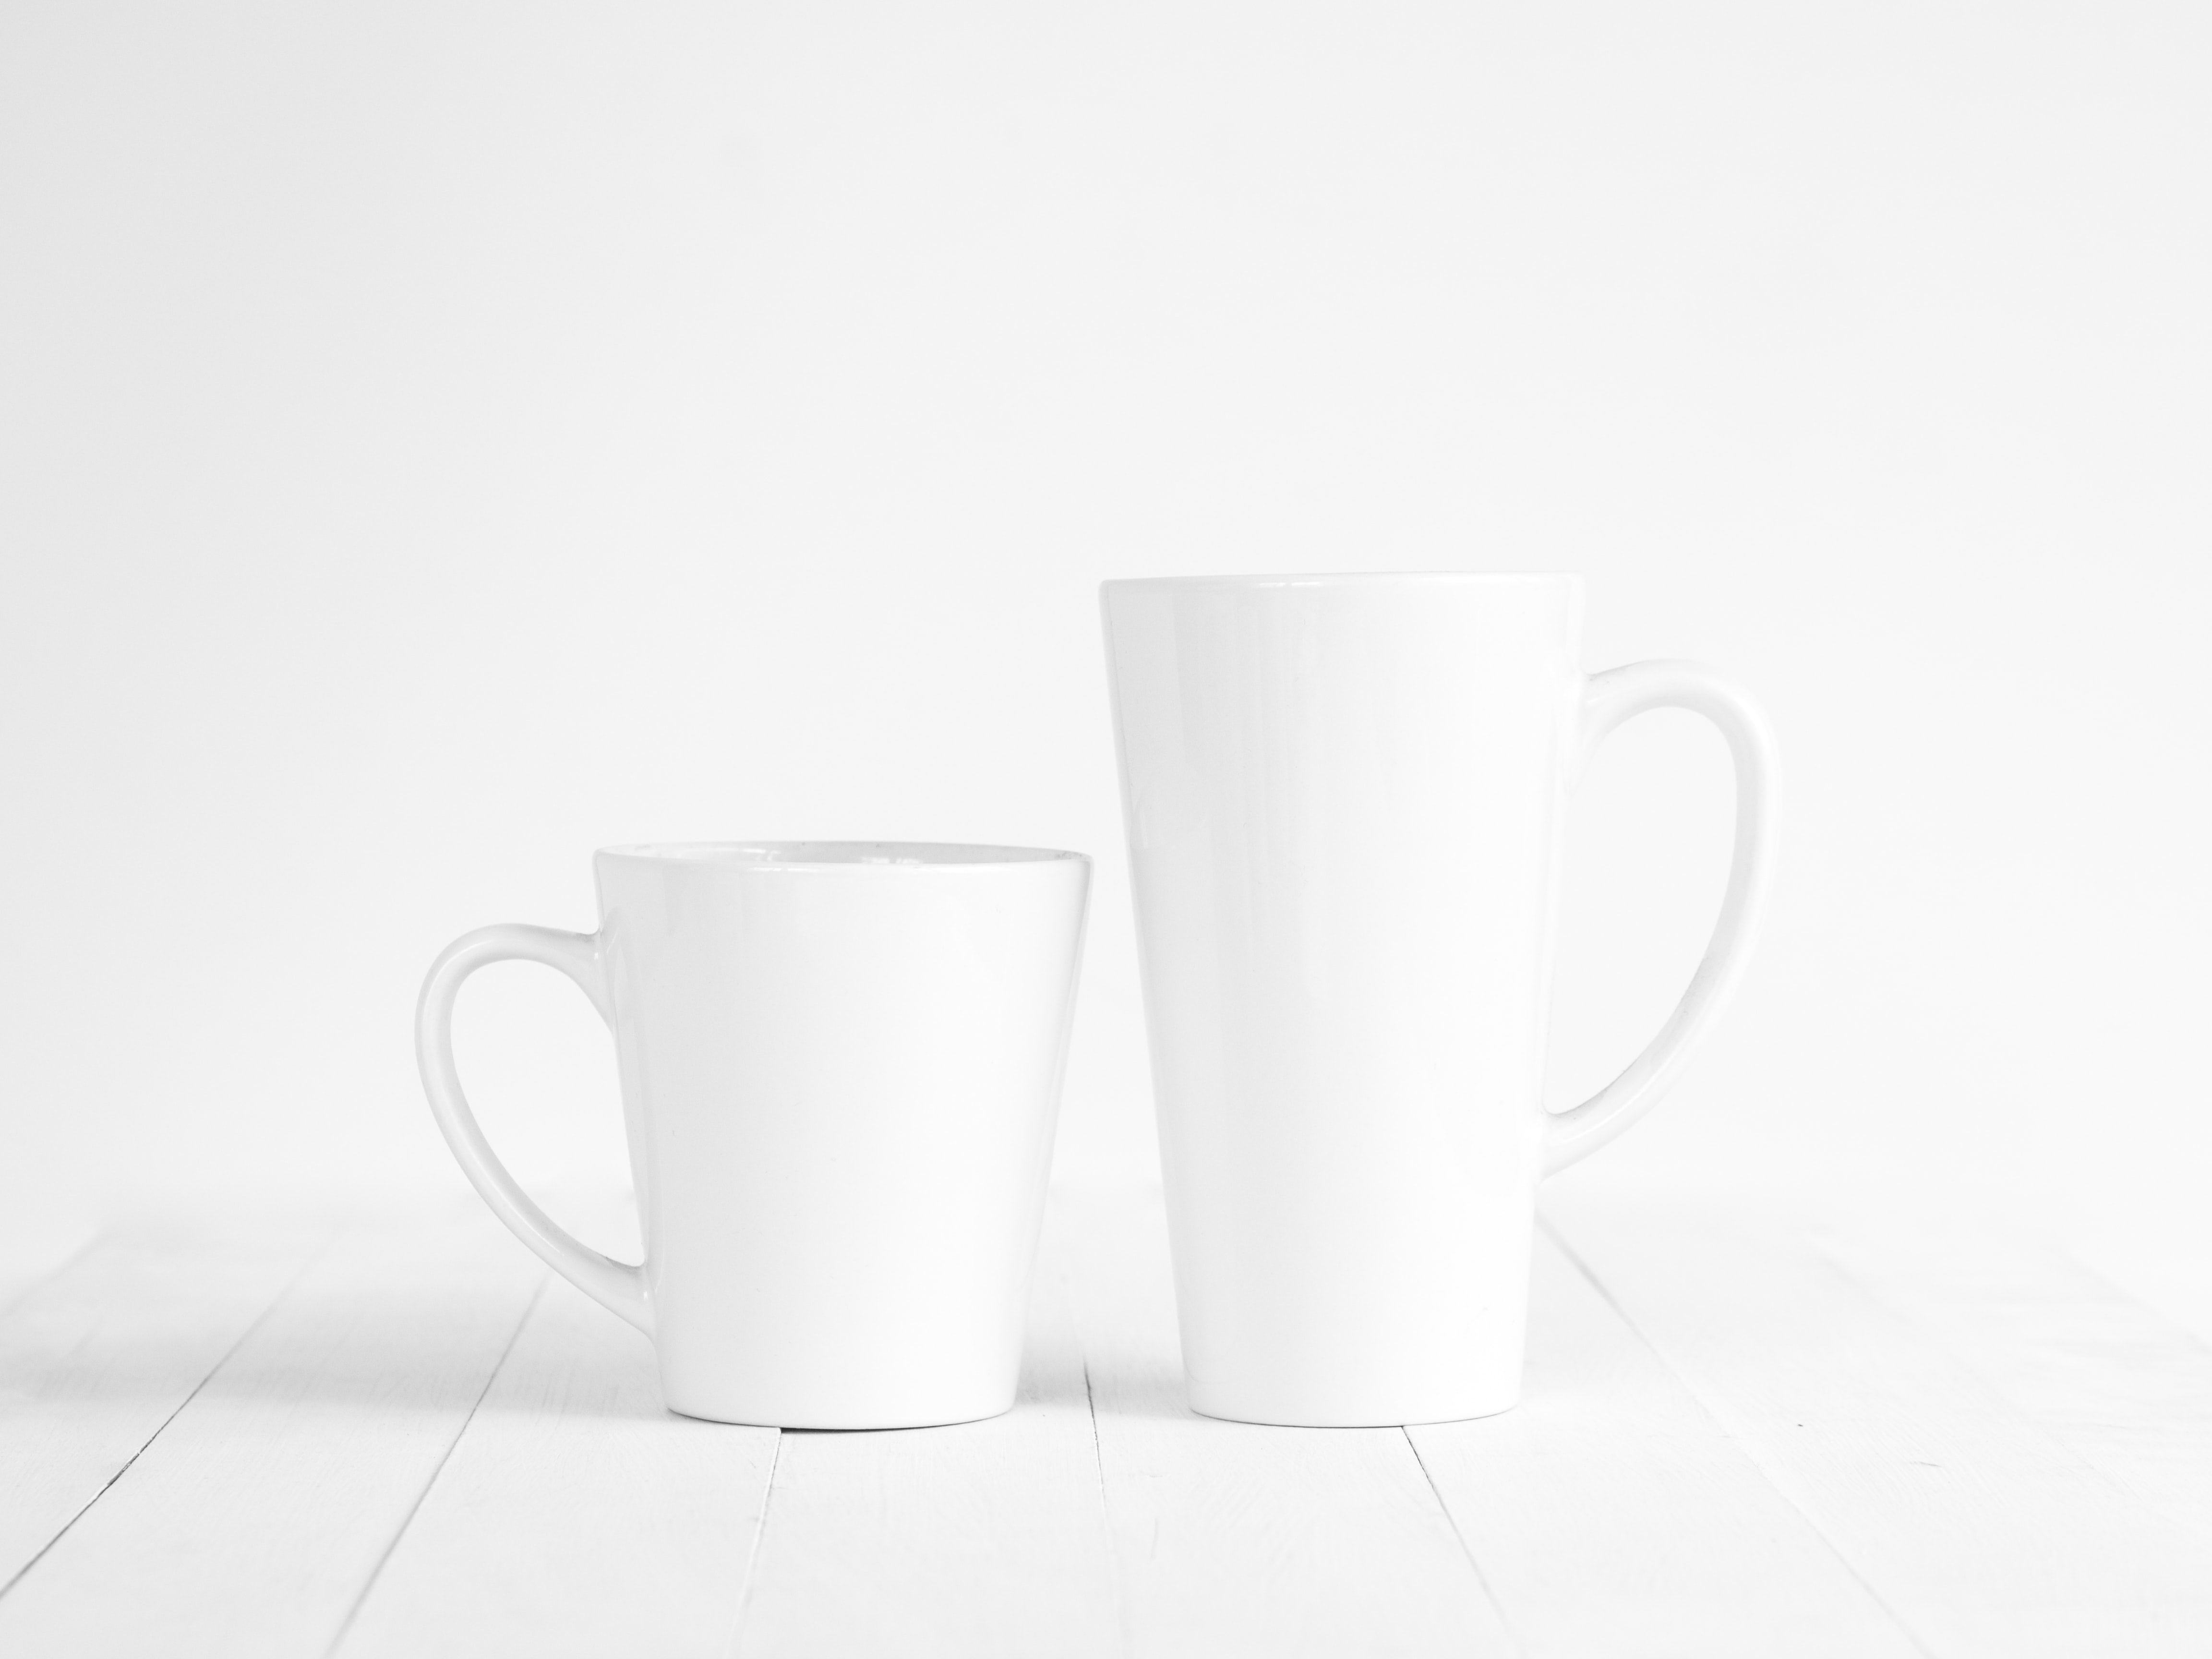 Comparing Sizes - Two different sized cups